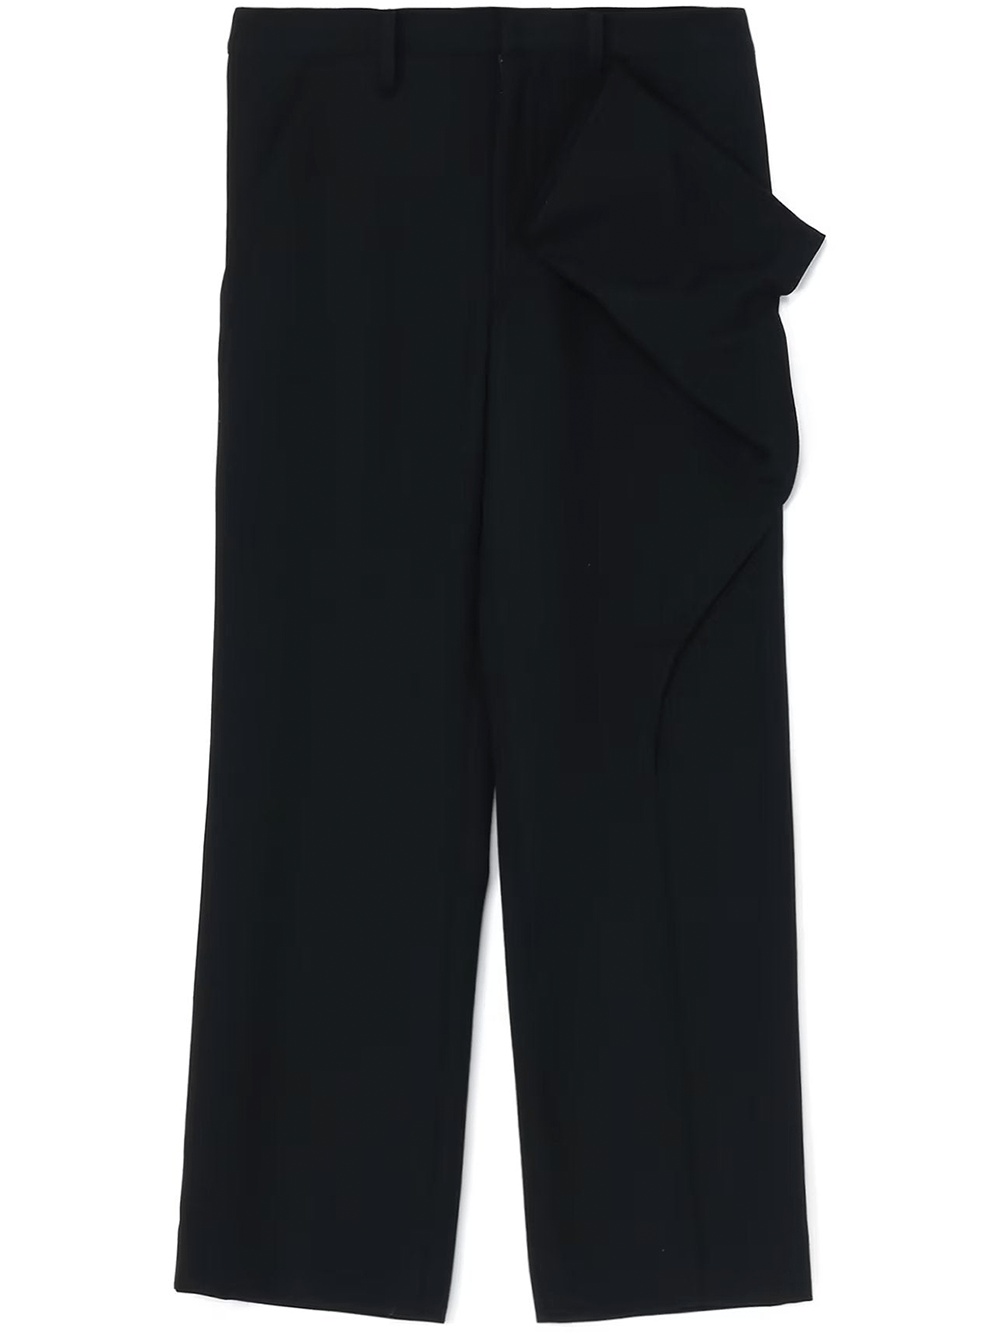 Left-Front Tucked Pants - 1